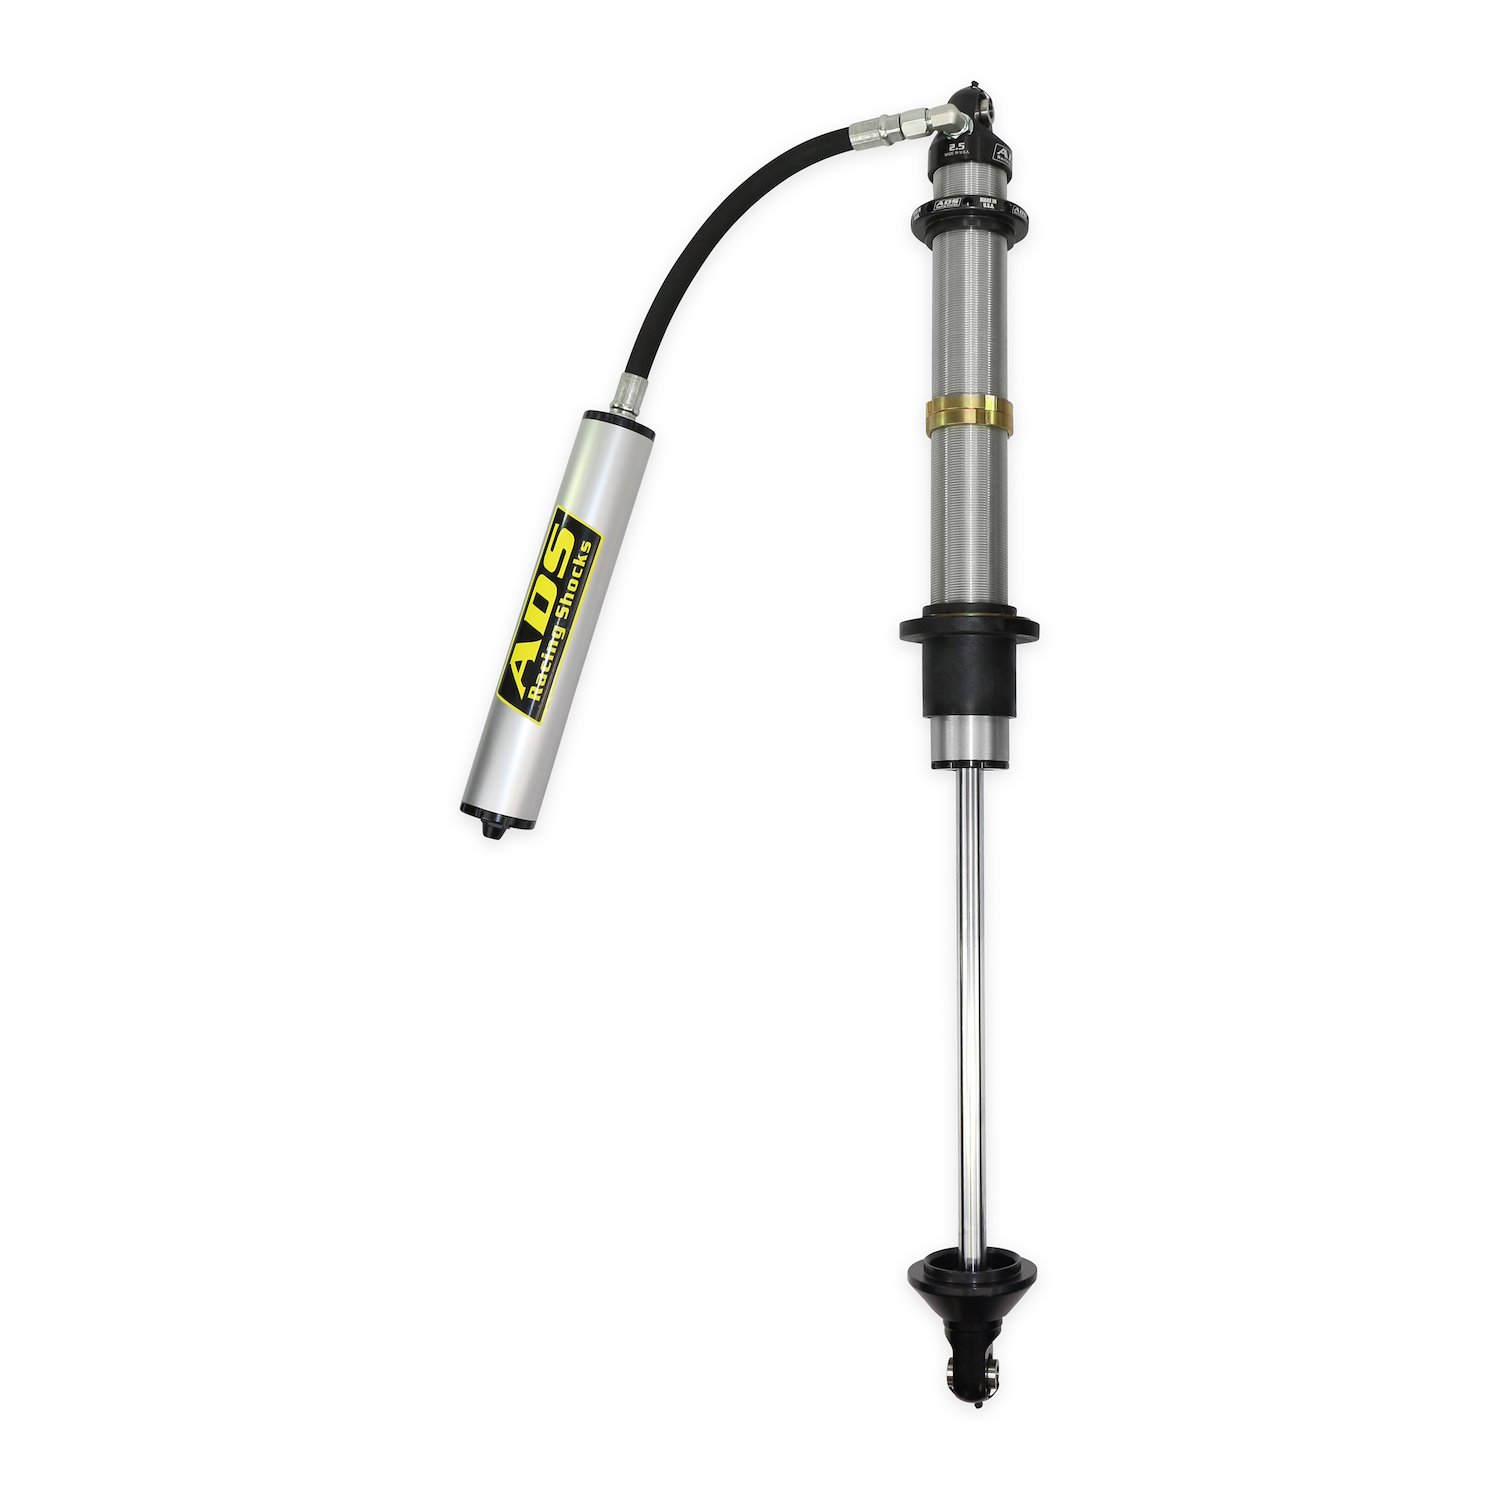 250-COS14-0A9 Coil-Over Race Shock, 2.5 in. x 12 in. Stroke, w/ Remote Reservoir (90-Degree Hose), w/ Compression Adjustment